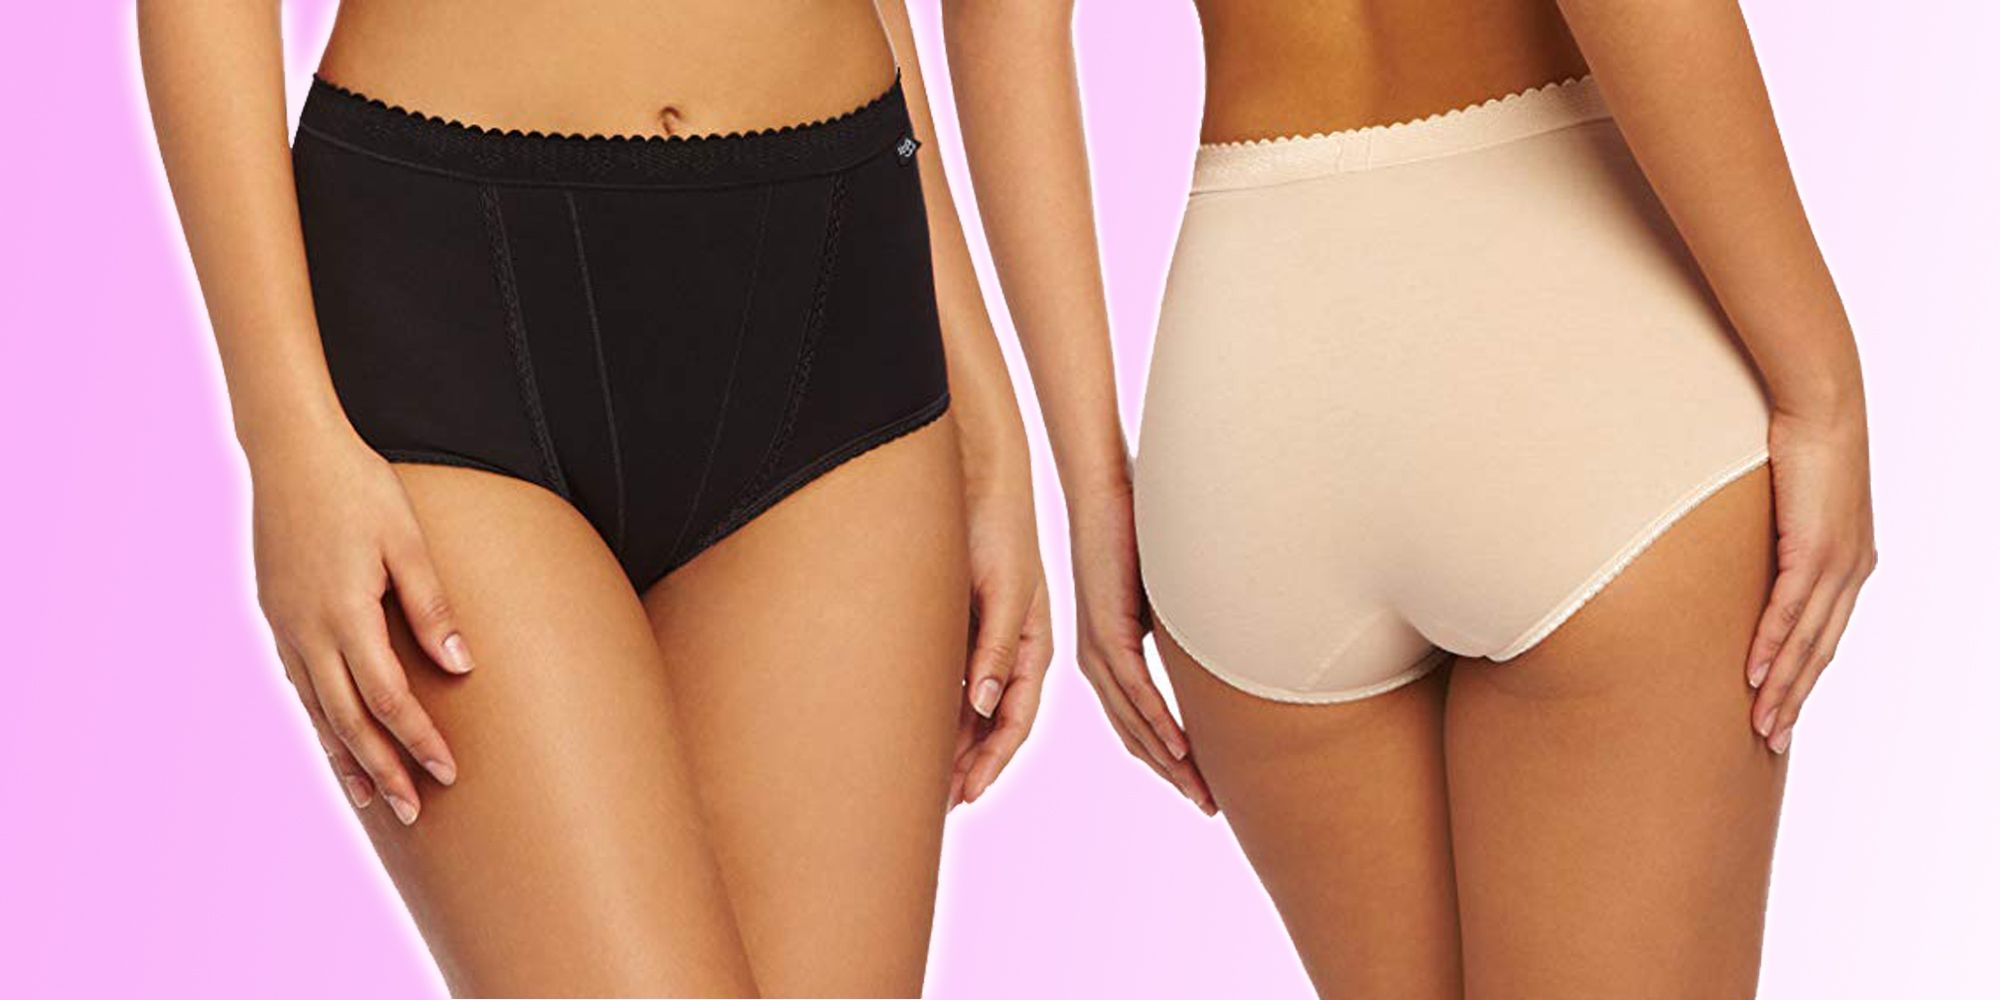 Best shapewear: These Sloggi slimming knickers are  bestsellers